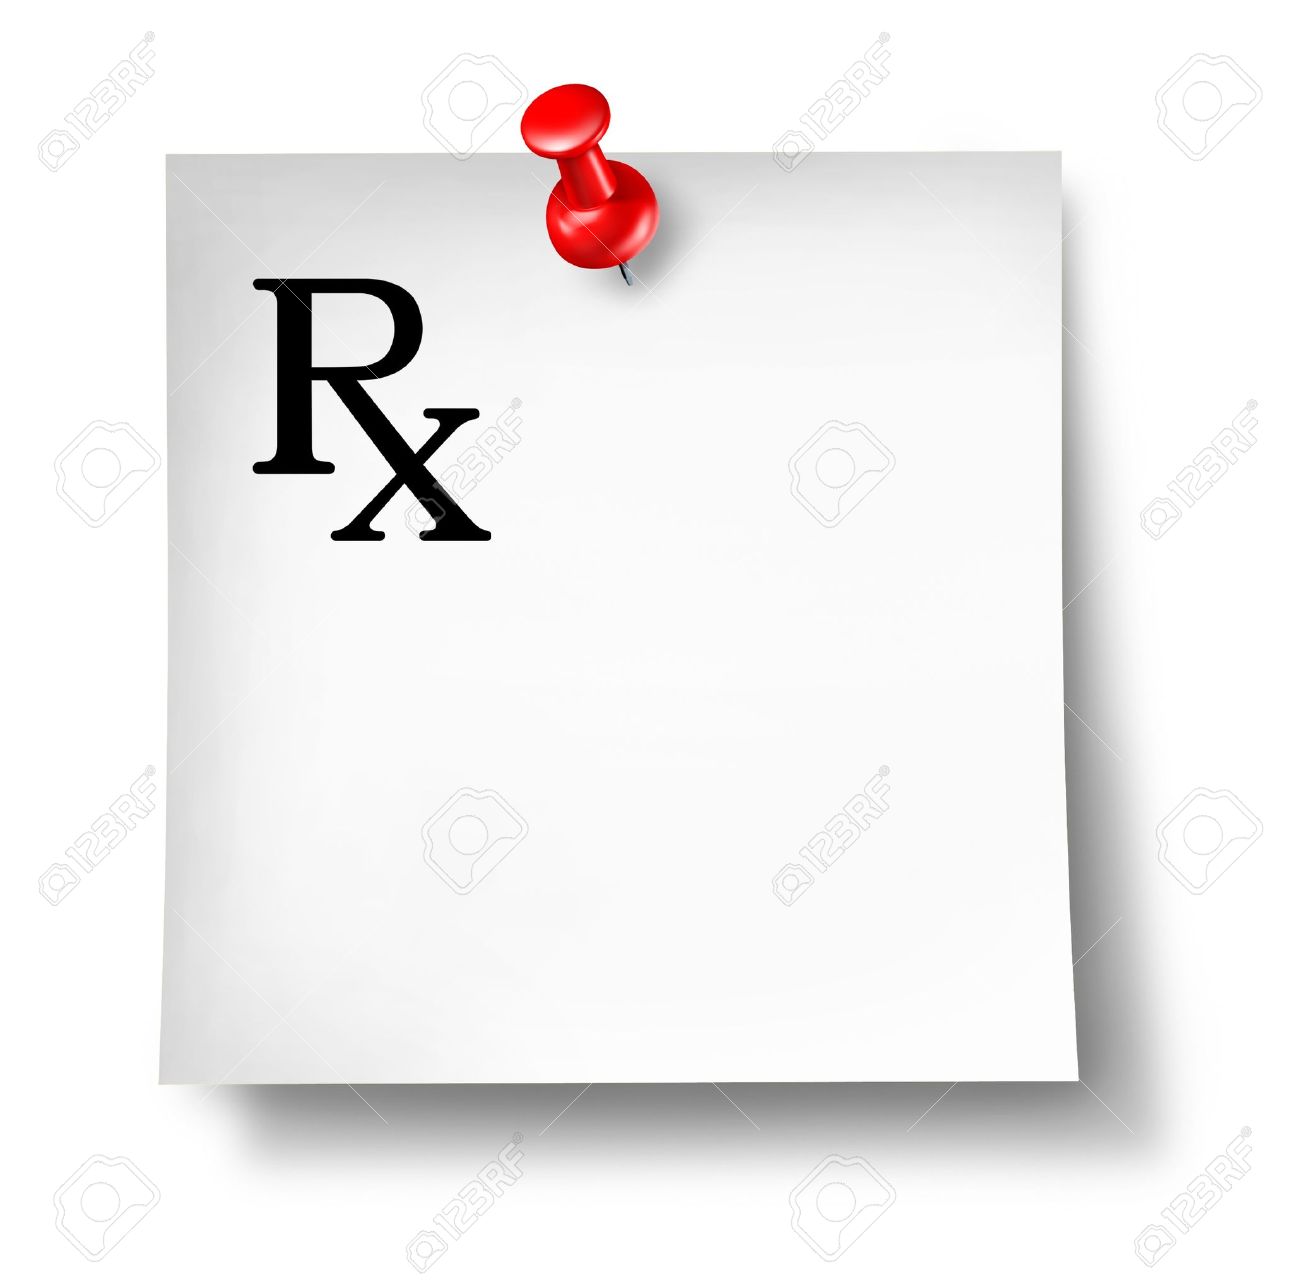 Prescription Office Note Isolated On A White Background